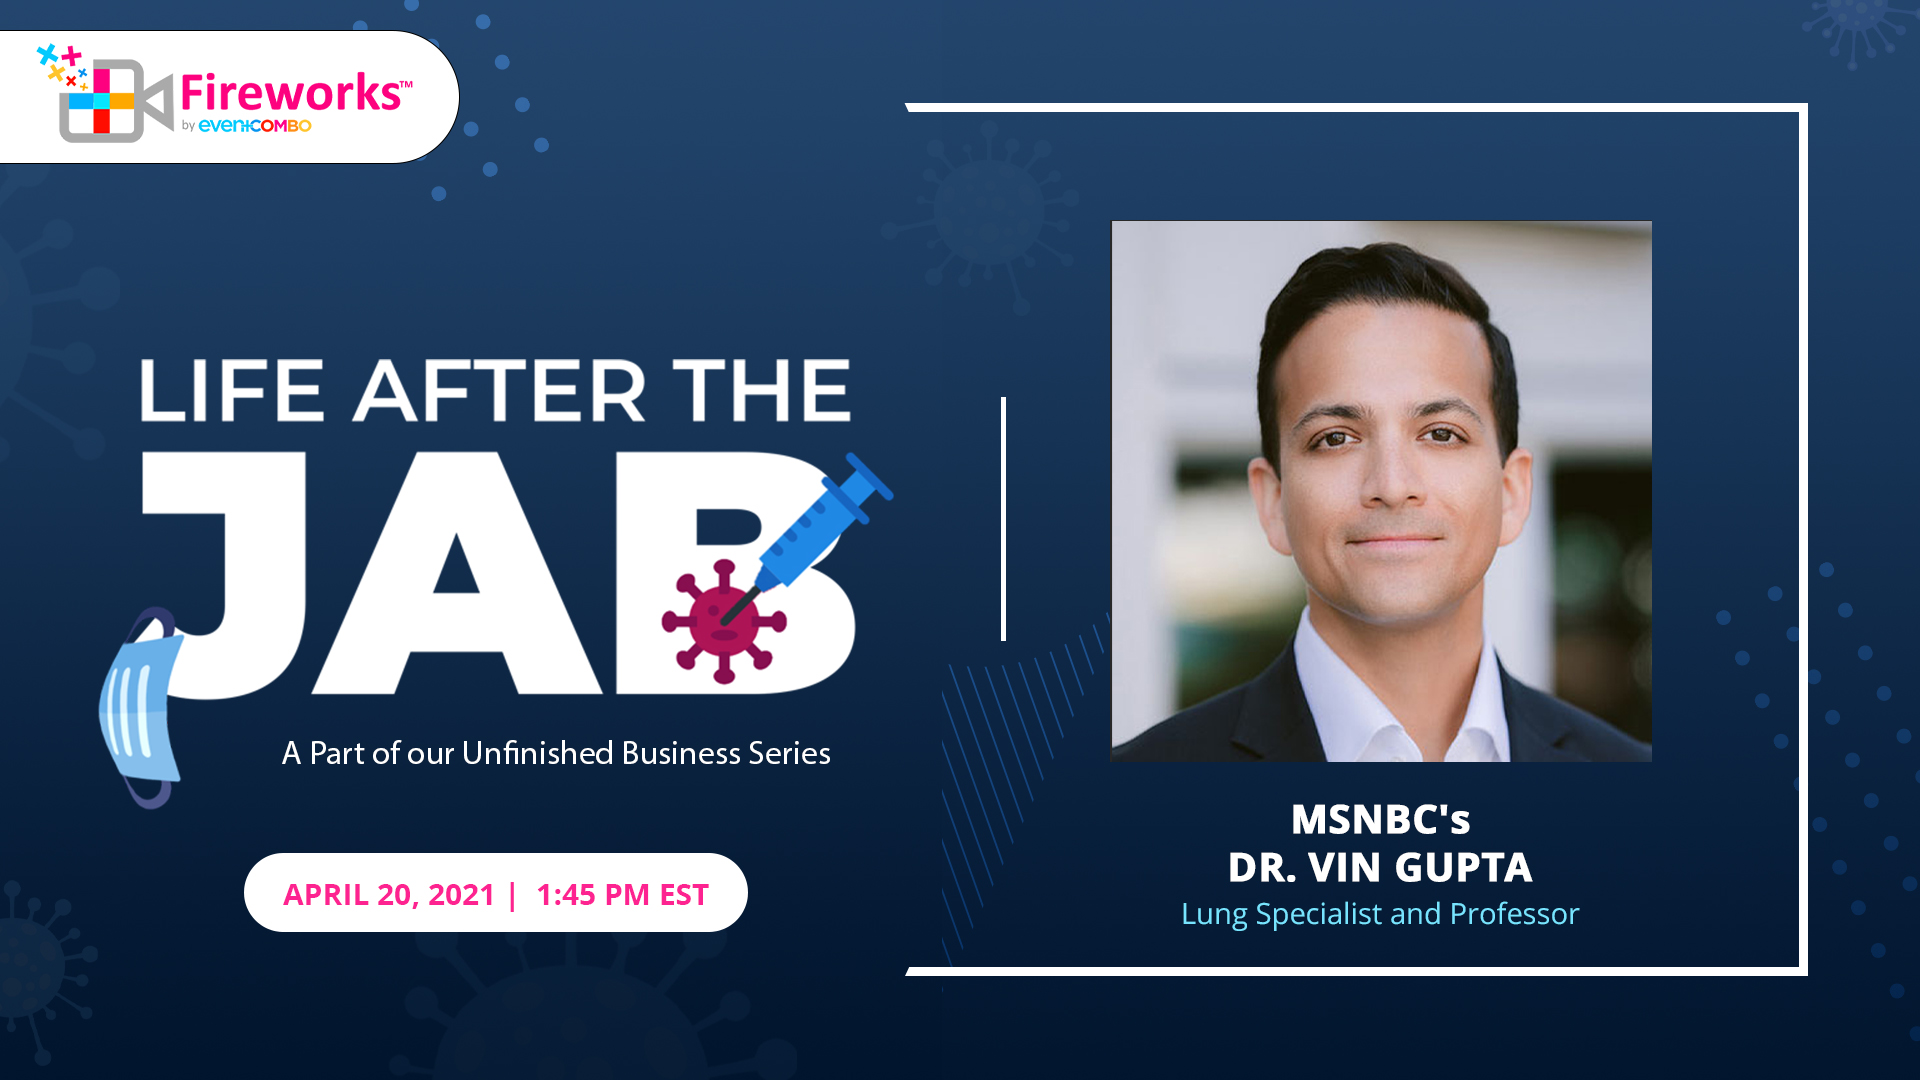 "Life After the Jab" Join the Discussion with Dr. Vin Gupta of MSNBC: Part of Eventcombo’s Unfinished Business Series